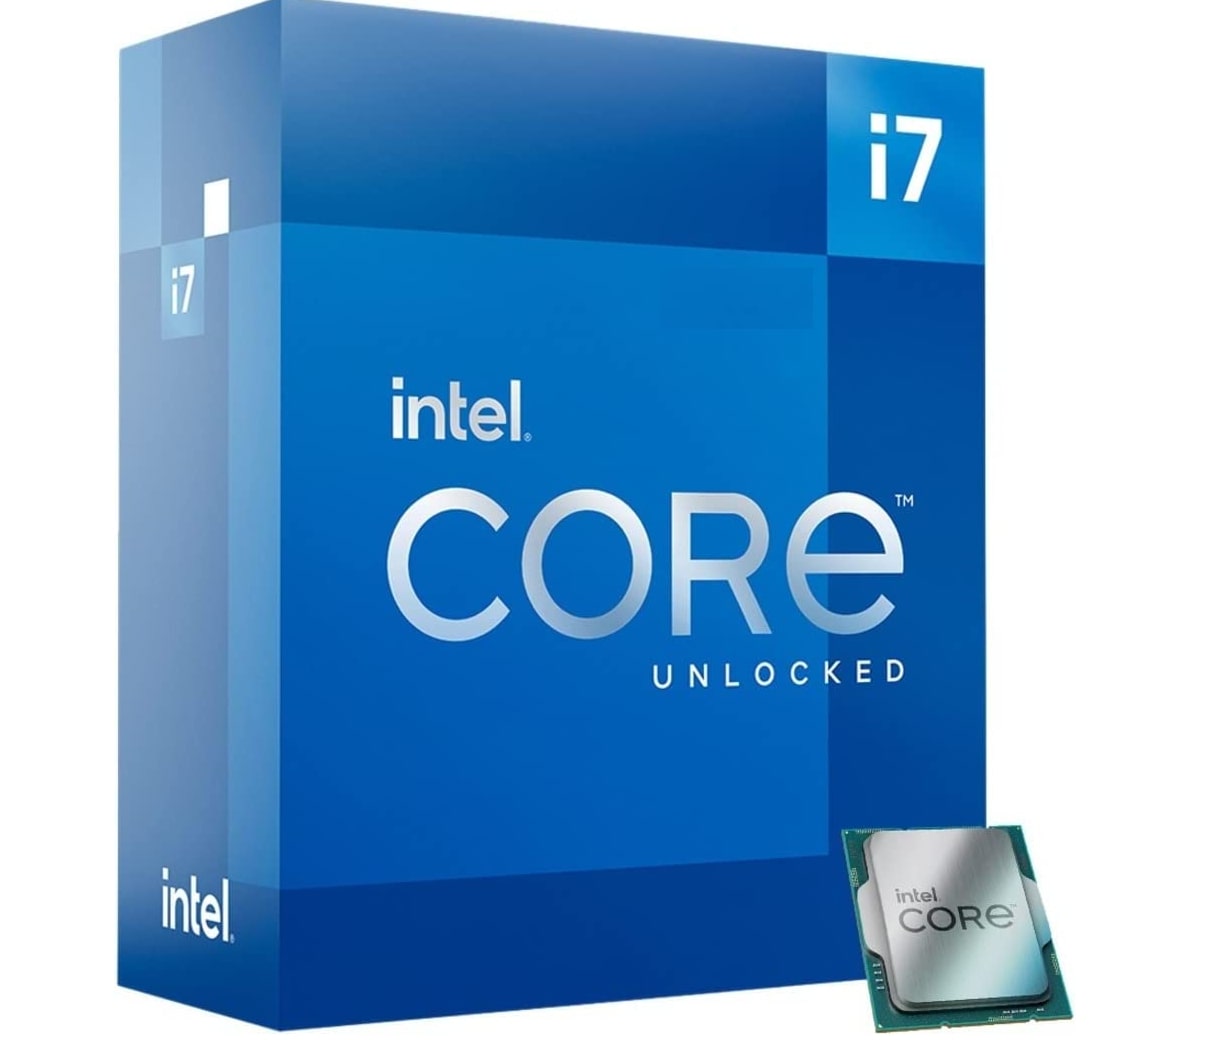 Intel Core i7-14700K performance and specifications leak showing up to 17%  gain vs Core i7-13700K in multi-threaded benchmarks - NotebookCheck.net News